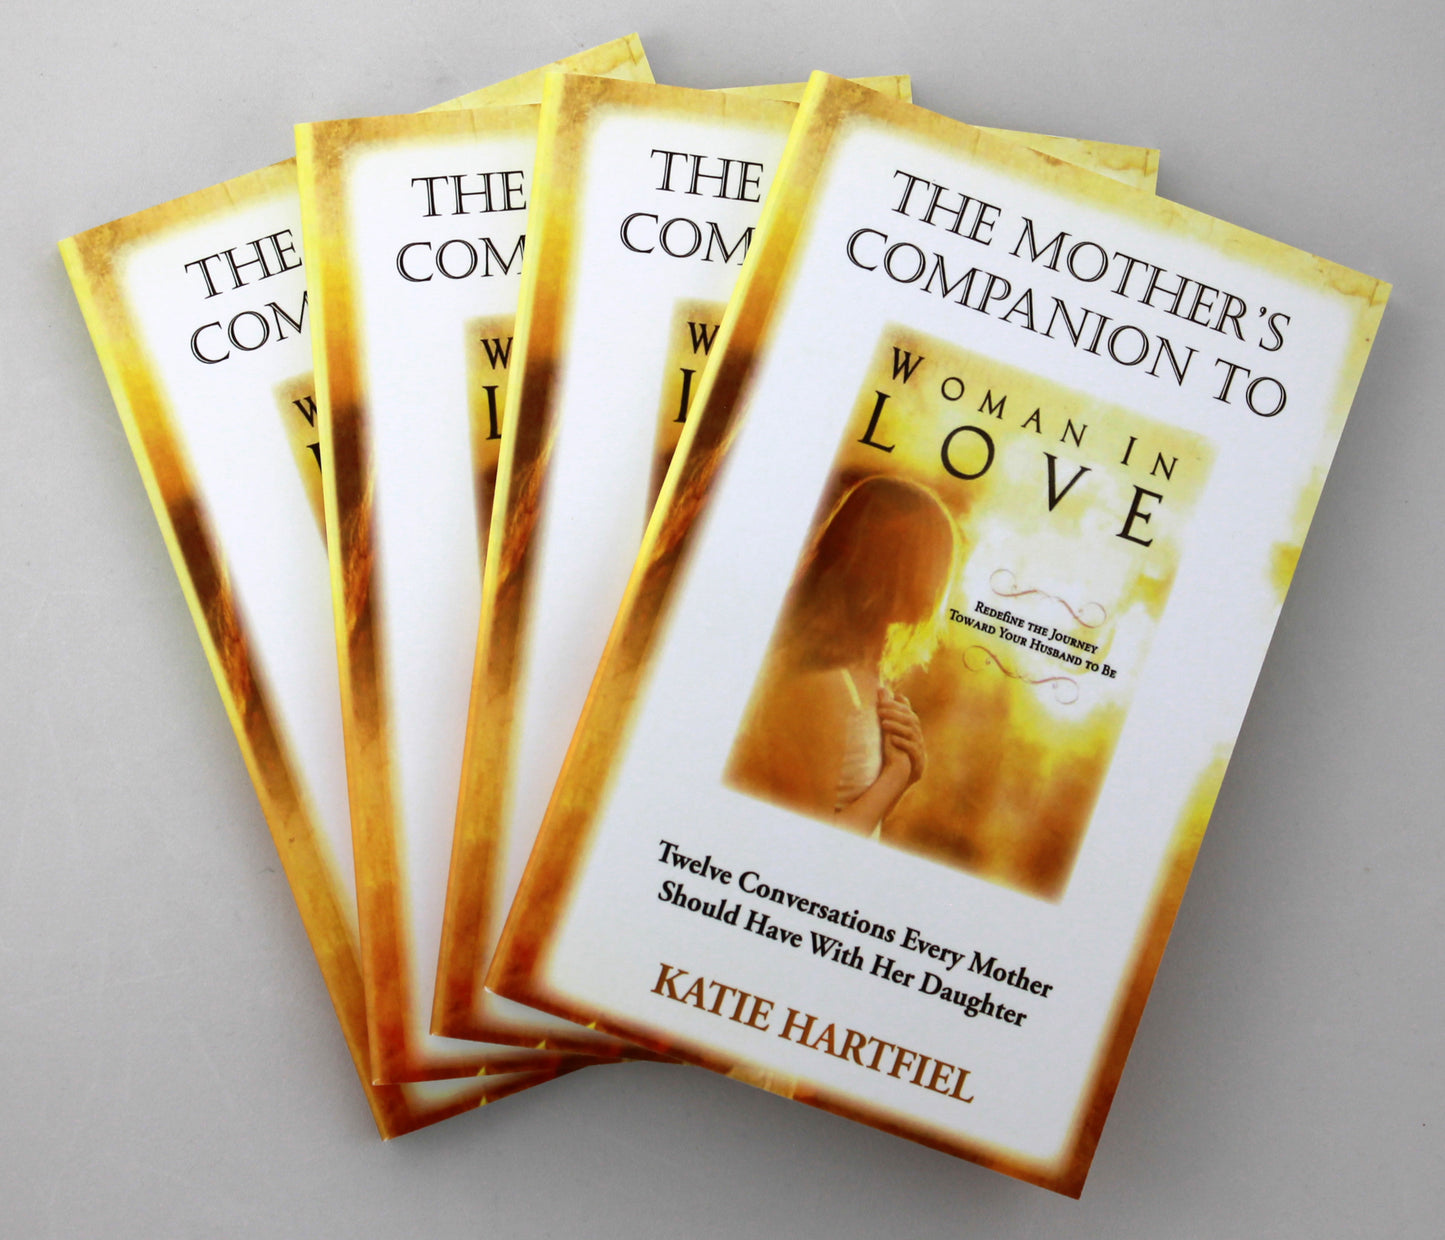 Mother's Companion to Woman In Love